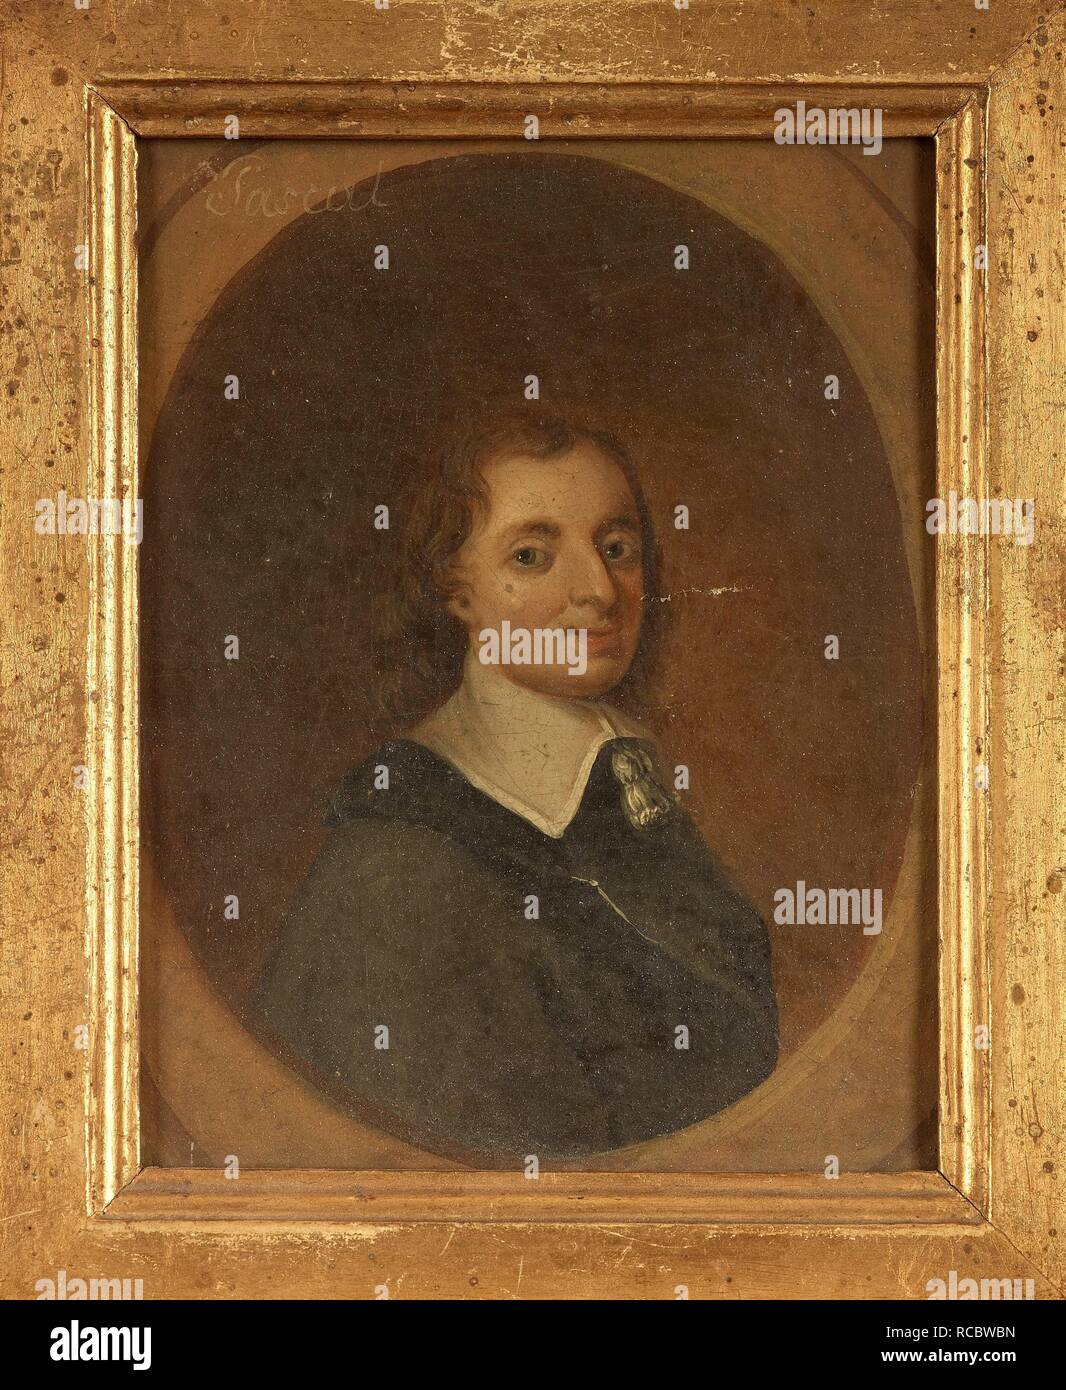 Portrait of the philosopher Blaise Pascal (1623-1662). Museum: PRIVATE COLLECTION. Author: ANONYMOUS. Stock Photo